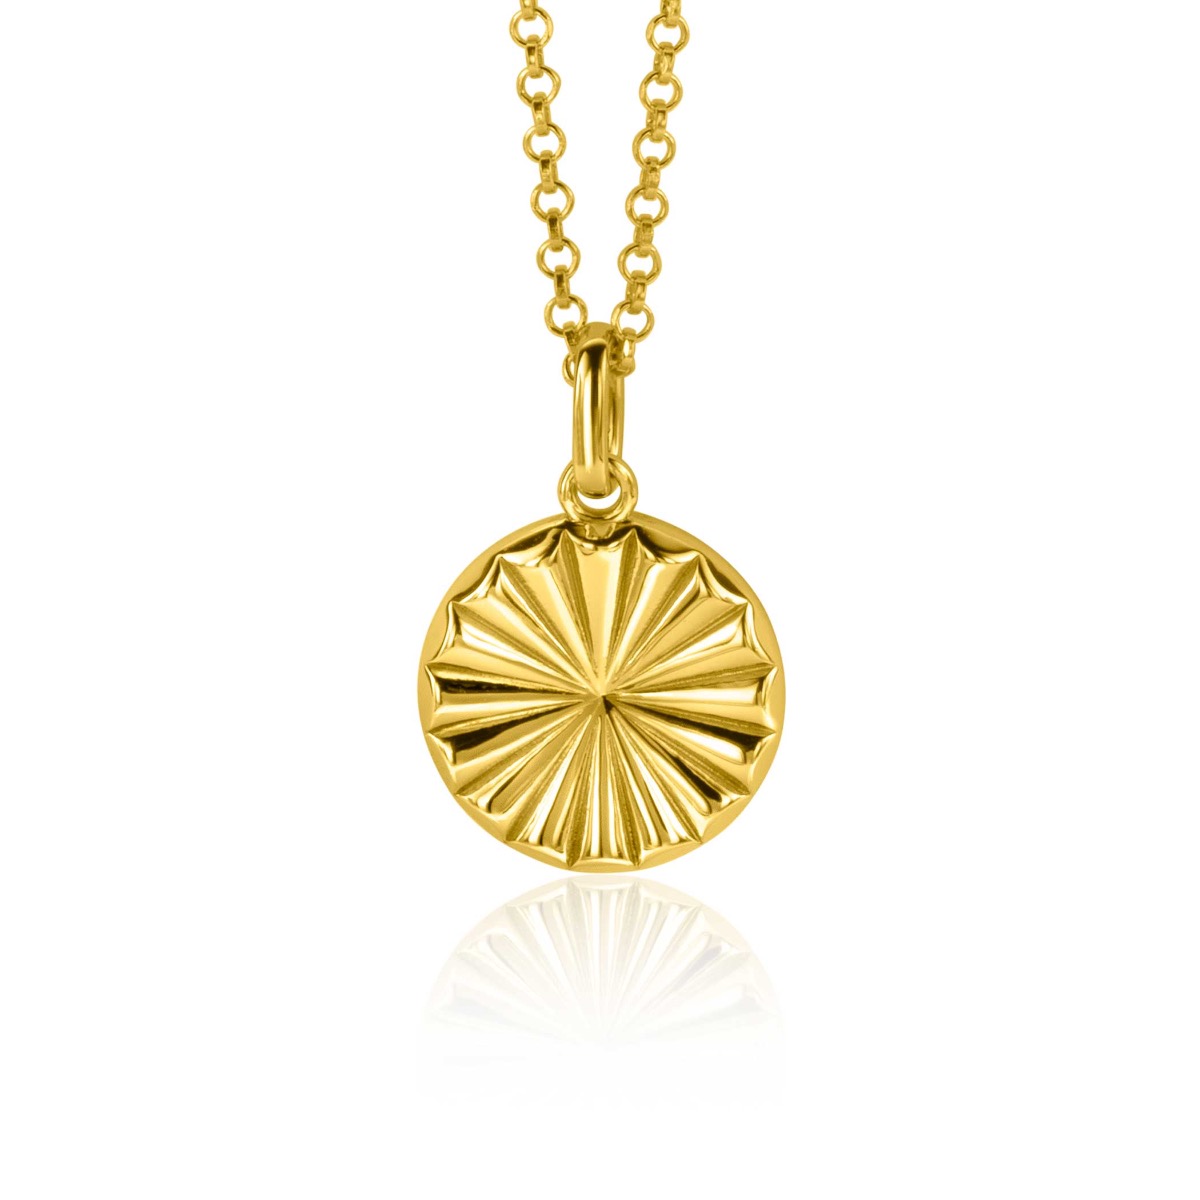 15mm ZINZI Gold Plated Sterling Silver Pendant Coin with Sunbeams ZIH2296 (excl. necklace)